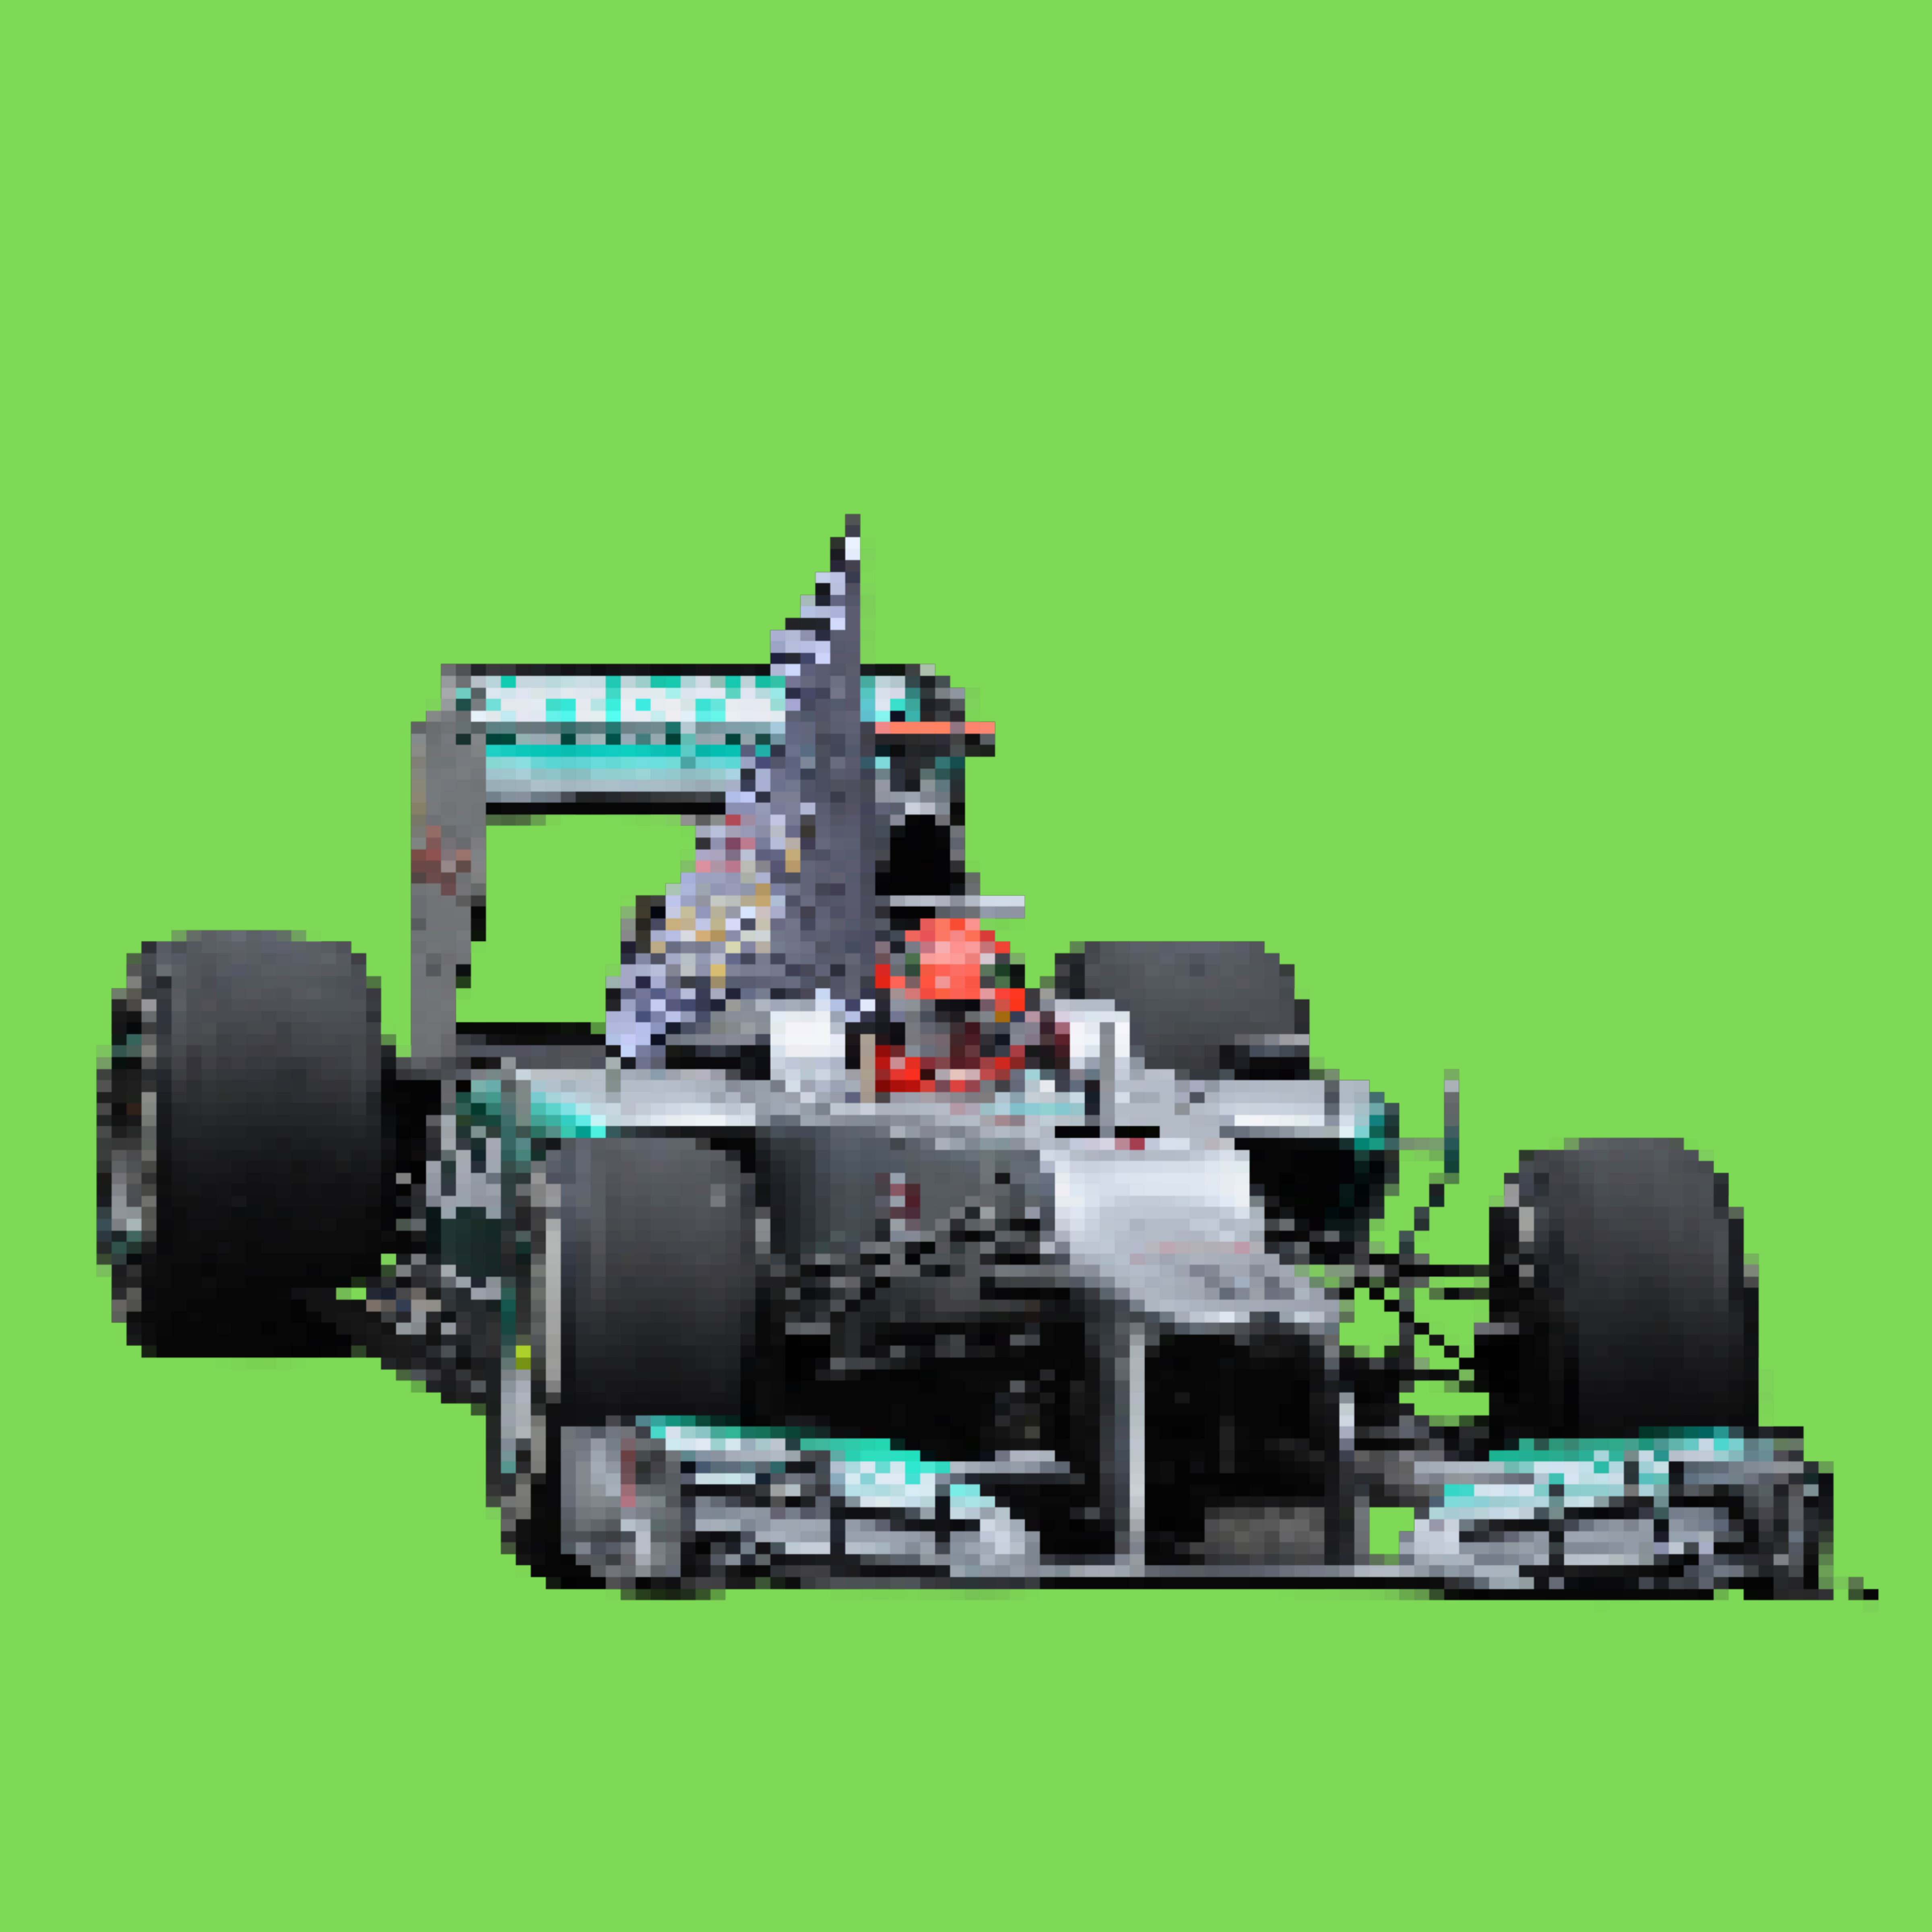 Funko on X: Go! Race down the track with our Oracle Red Bull Racing set,  including exclusive Pop! Sergio Pérez with helmet & Pops! Sergio Pérez &  Max Verstappen. Also pulling into